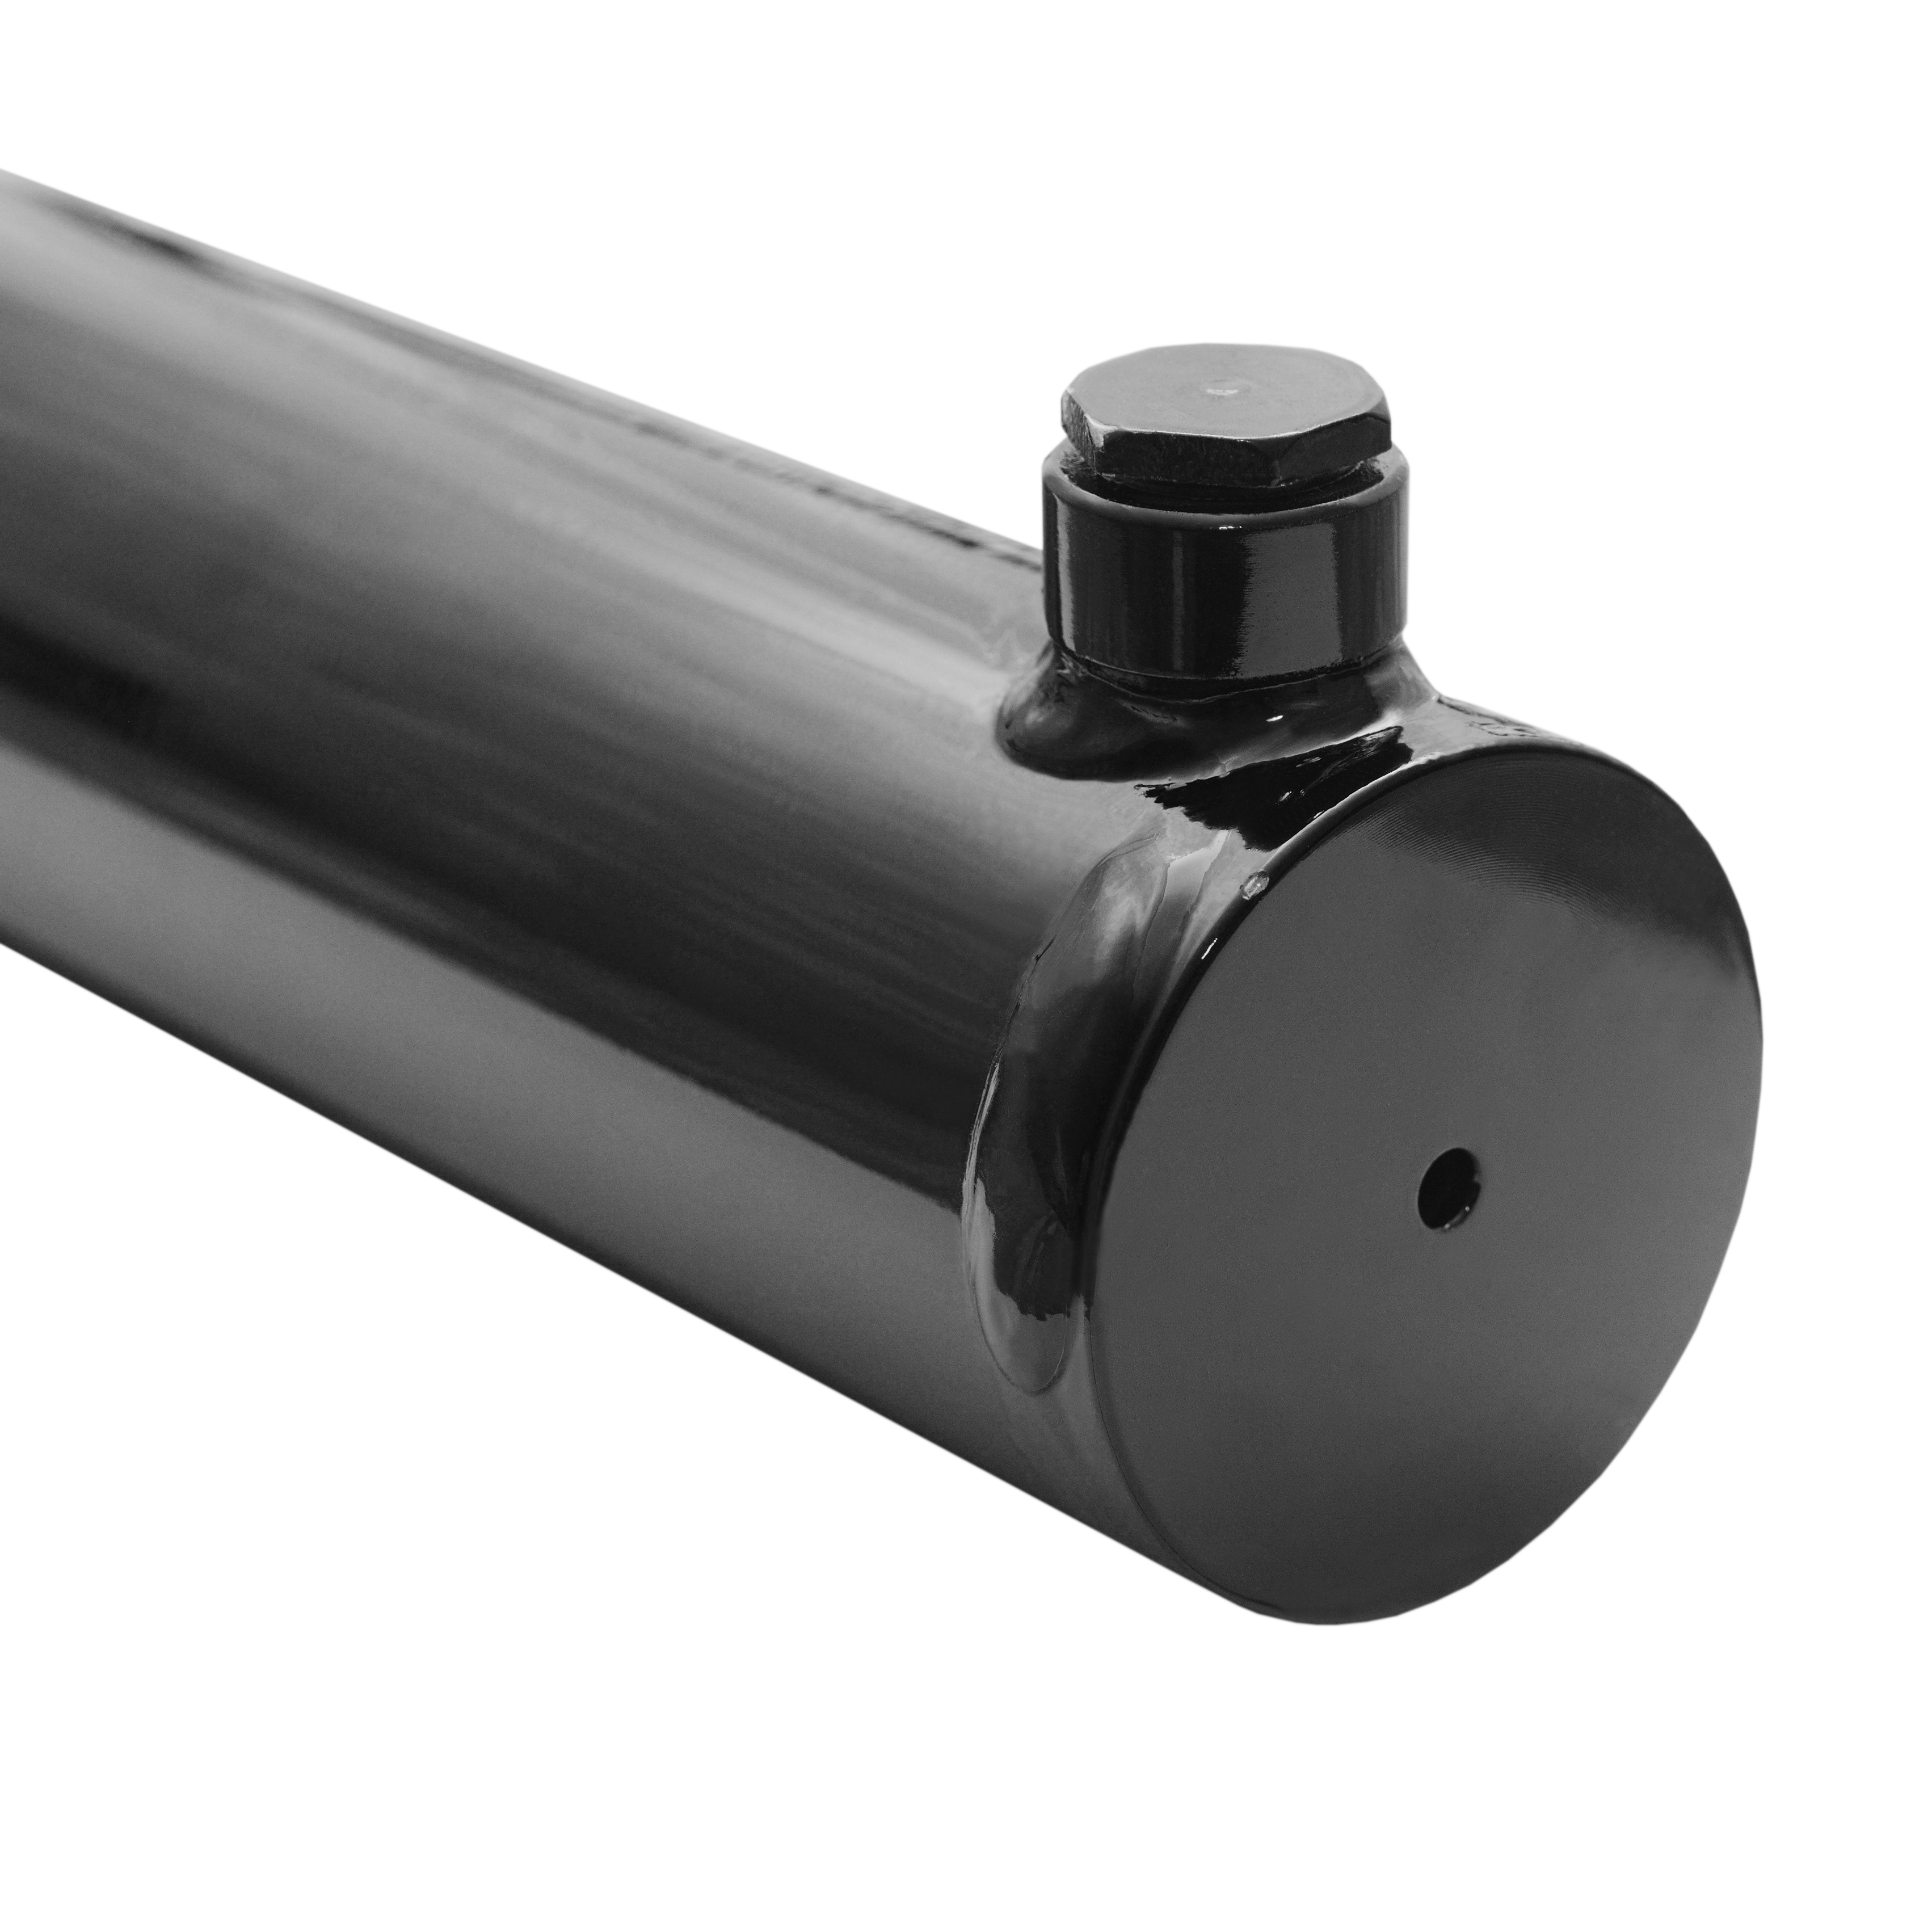 2 bore x 13 stroke hydraulic cylinder, welded universal double acting cylinder | Magister Hydraulics